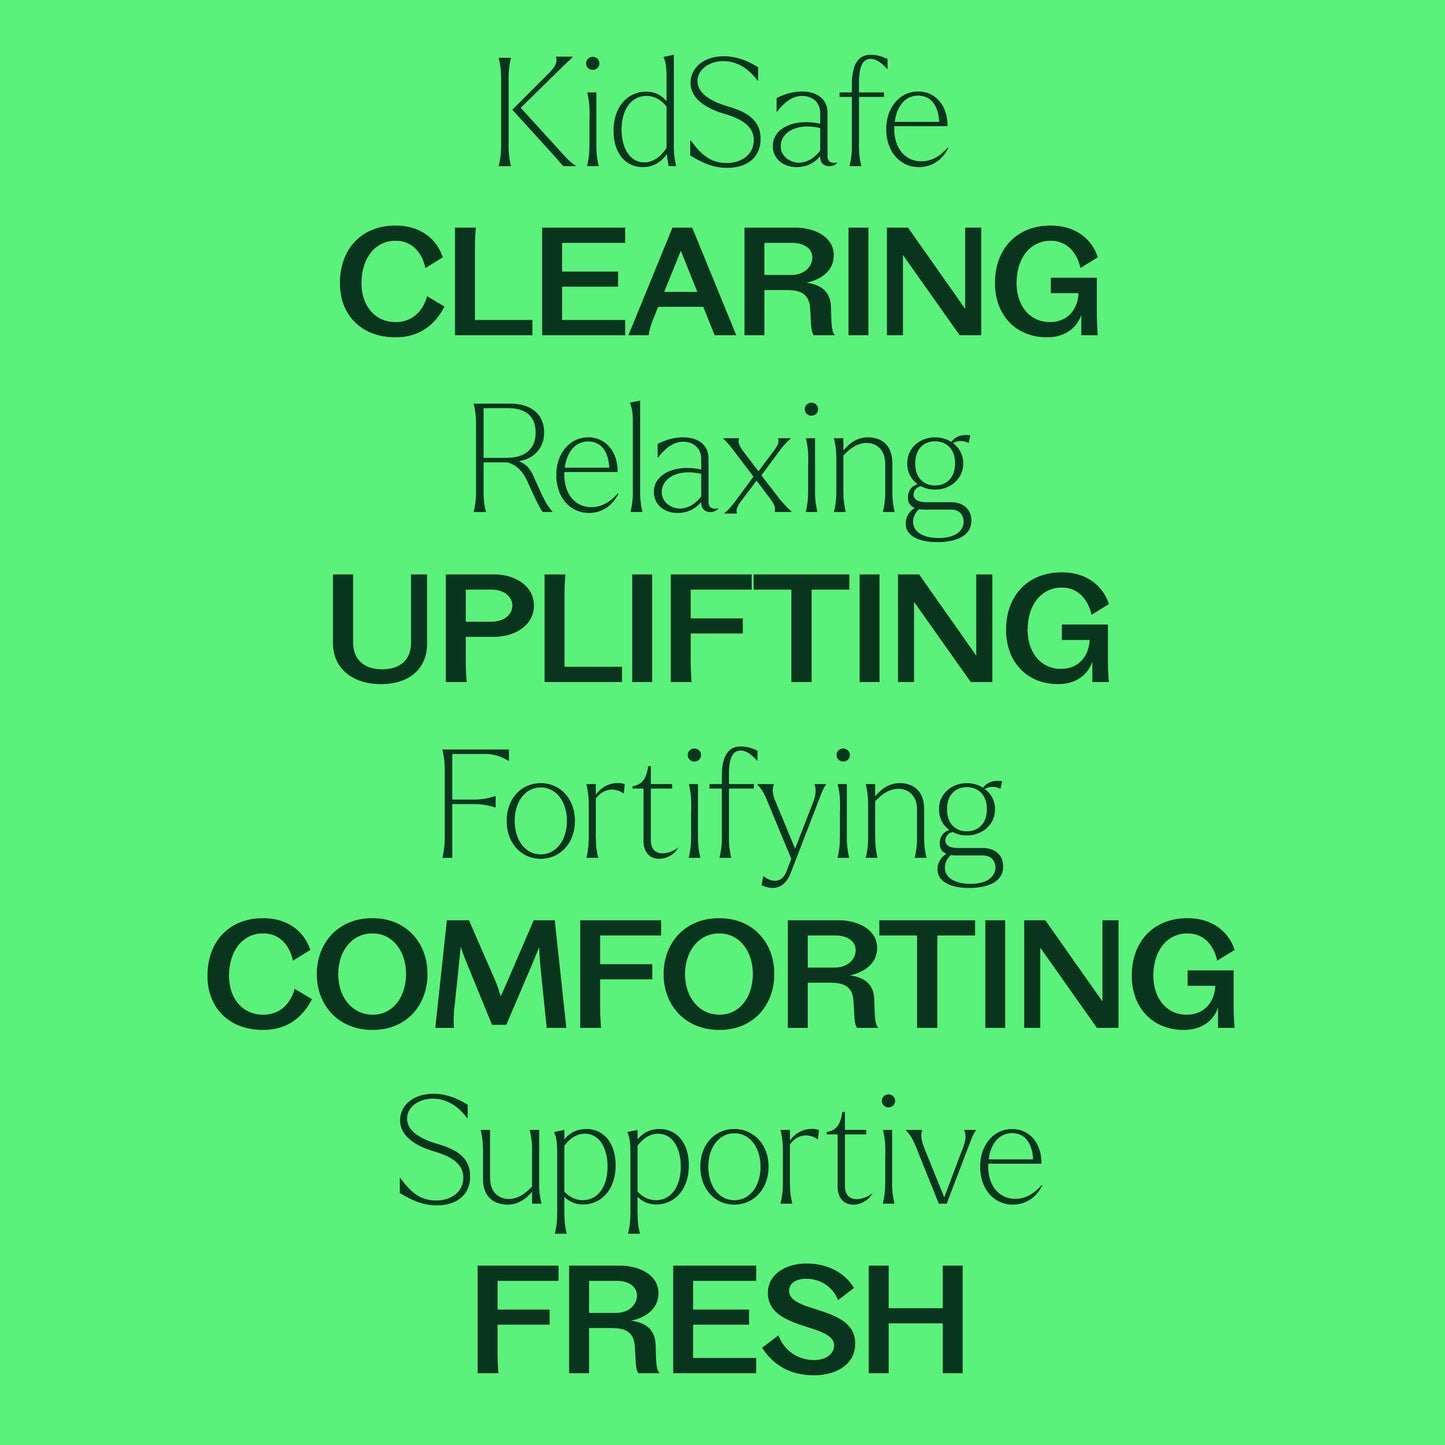 KidSafe Essential Oil Starter Pack Roll-On Key Benefits: KidSafe, Clearing, Relaxing, Uplifting, Fortifying, Comforting, Supportive, Fresh